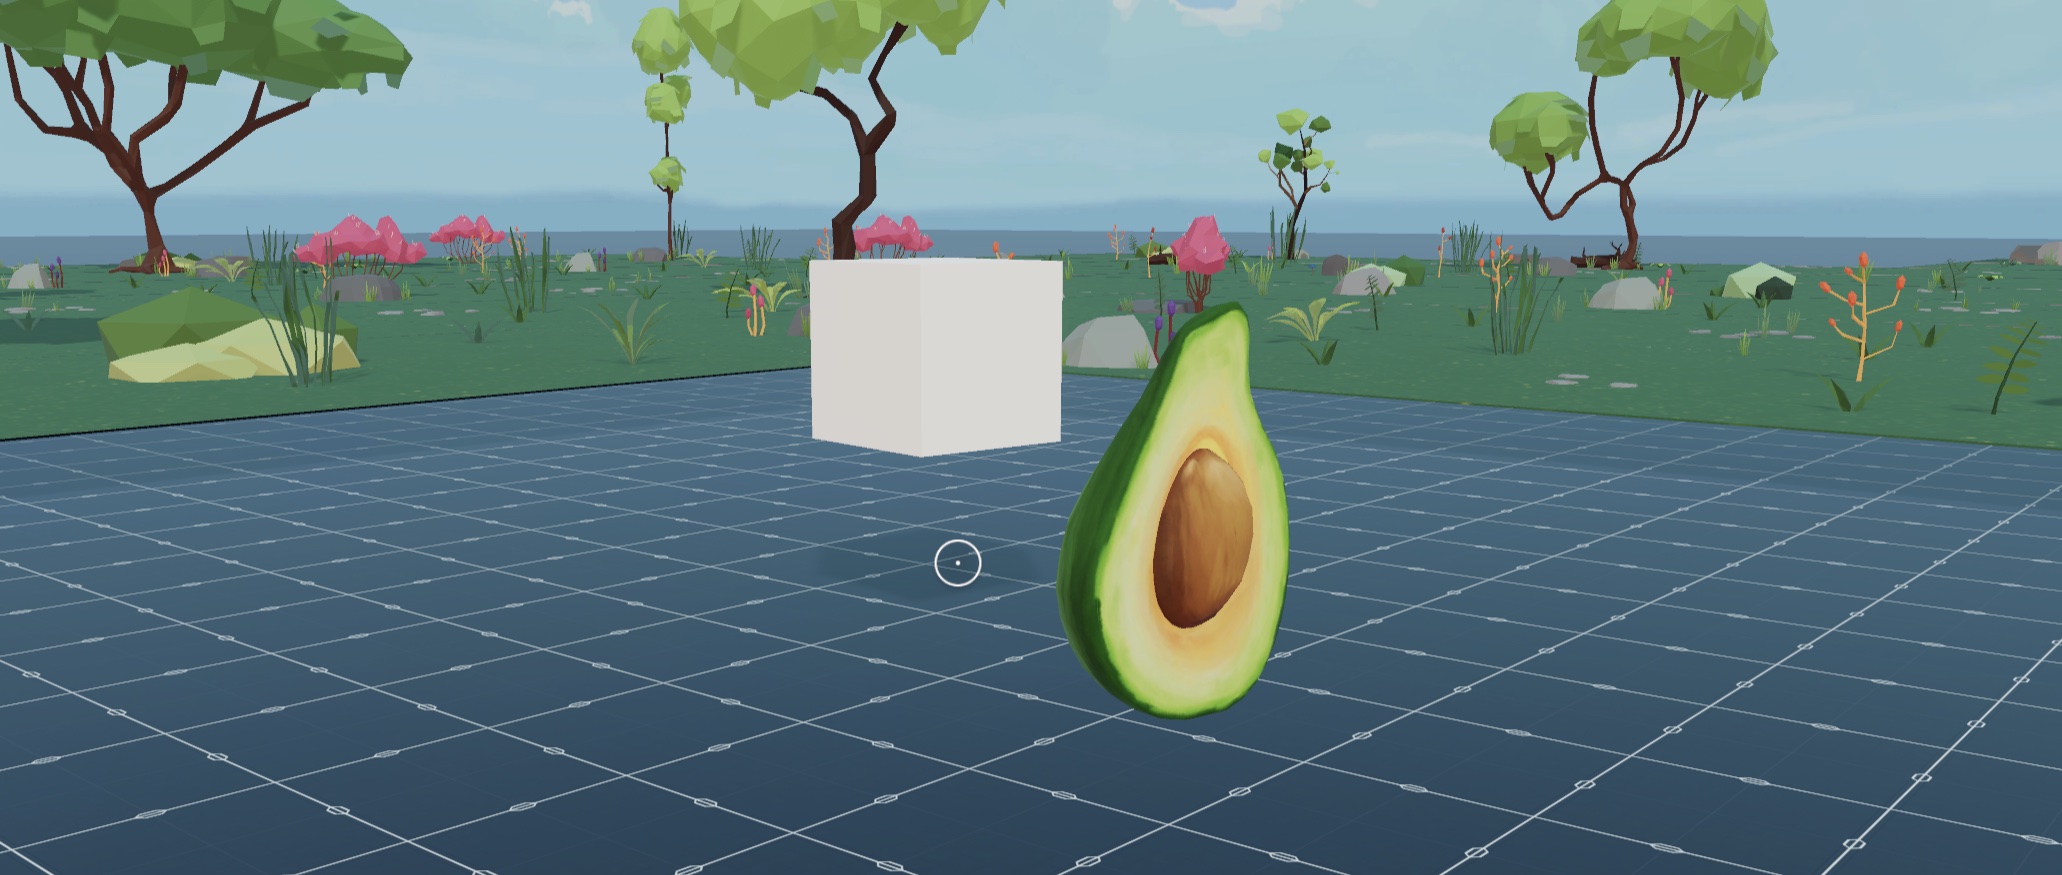 THREE NEW CODES JUST DROPPED (One Fruit Simulator) 